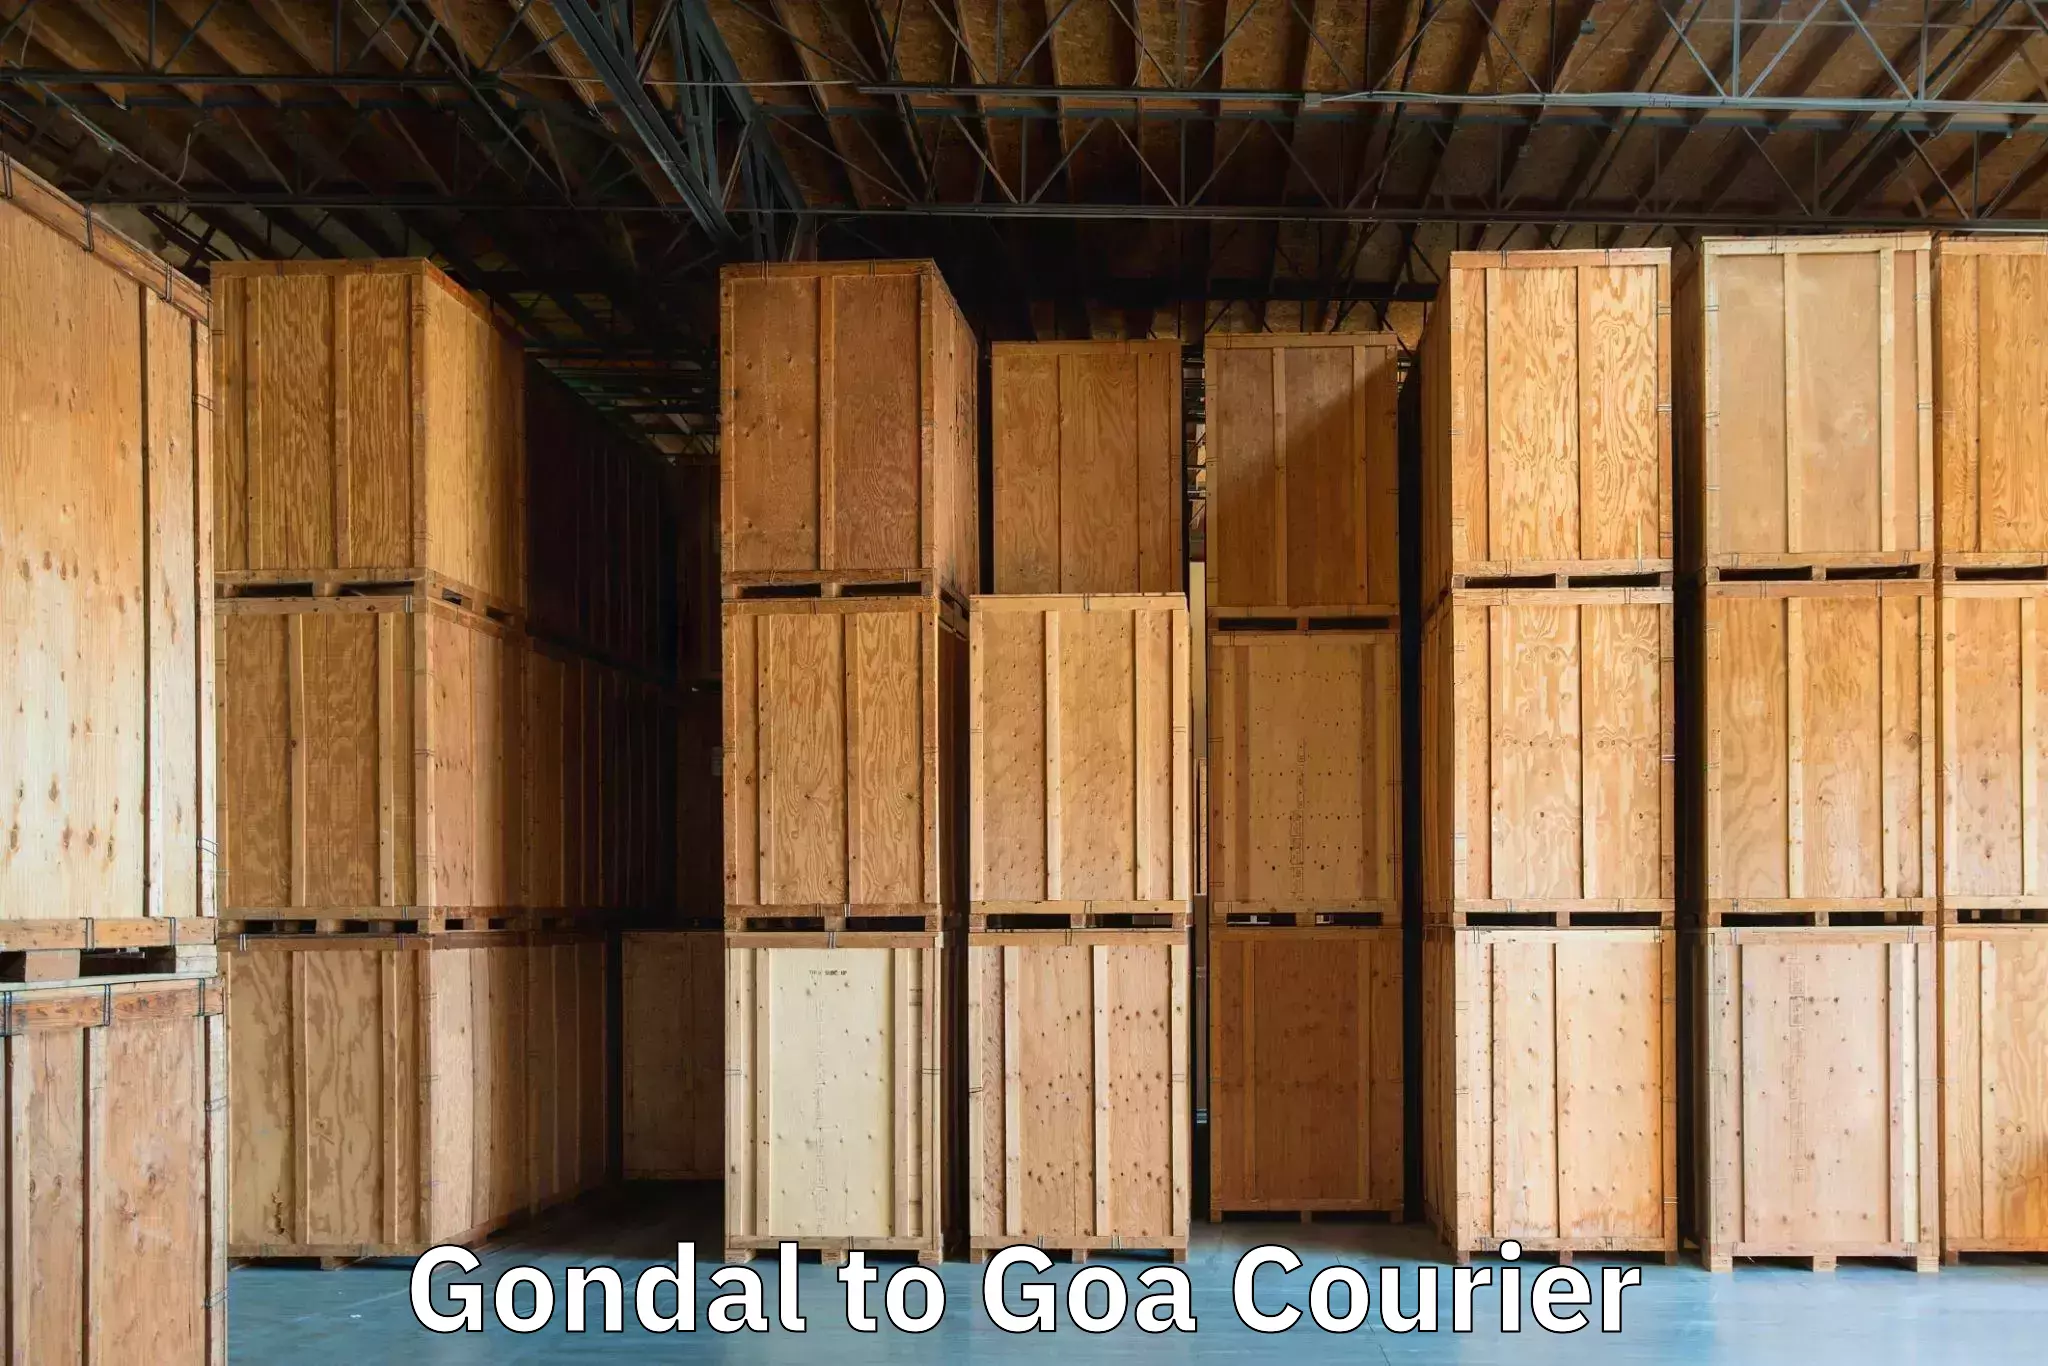 Luggage shipment specialists Gondal to Goa